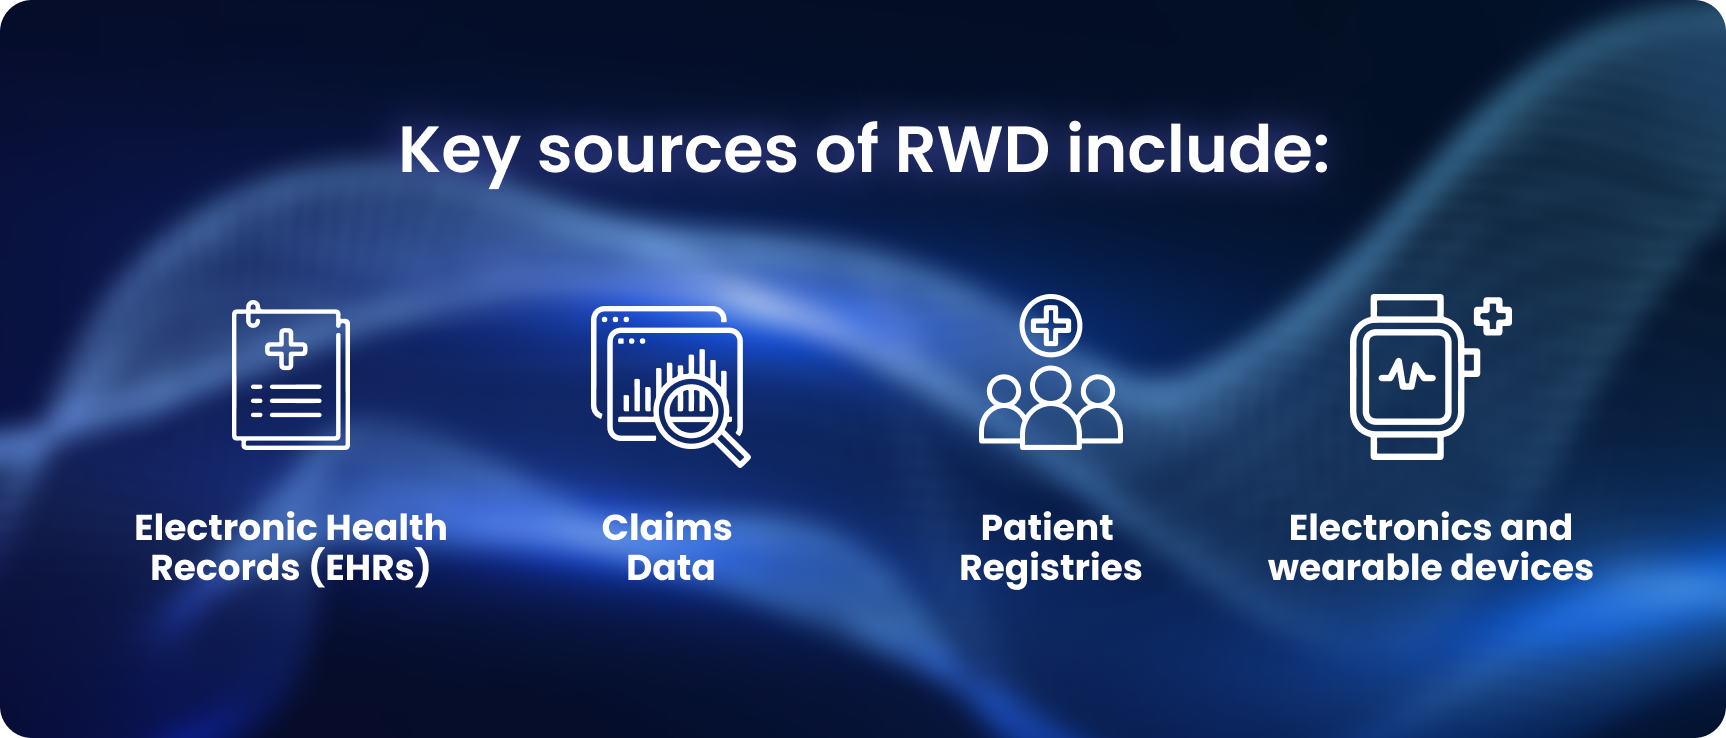 Real world data comes from a variety of sources including electronic health records, claims data and patient registries